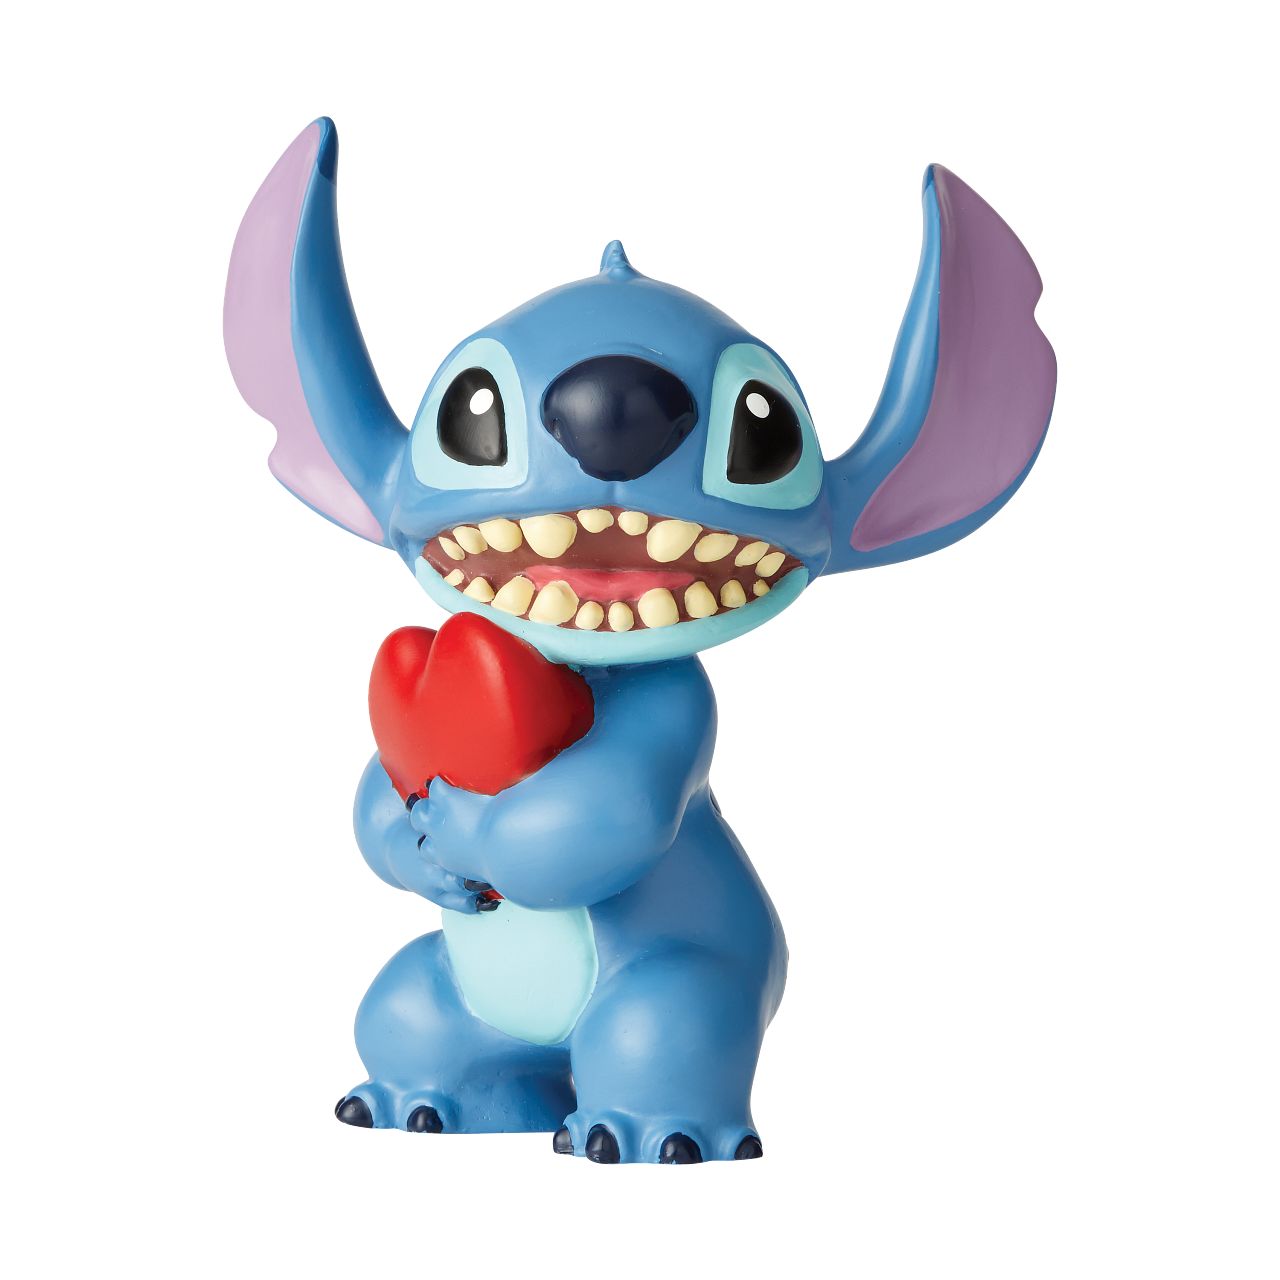 Stitch Heart Figurine  Just when the creators of Experiment 626 thought he was incapable of love, Stitch learned all about how to love from his best friend Lilo. This irresistible extra-terrestrial is the perfect addition to your 'ohana.